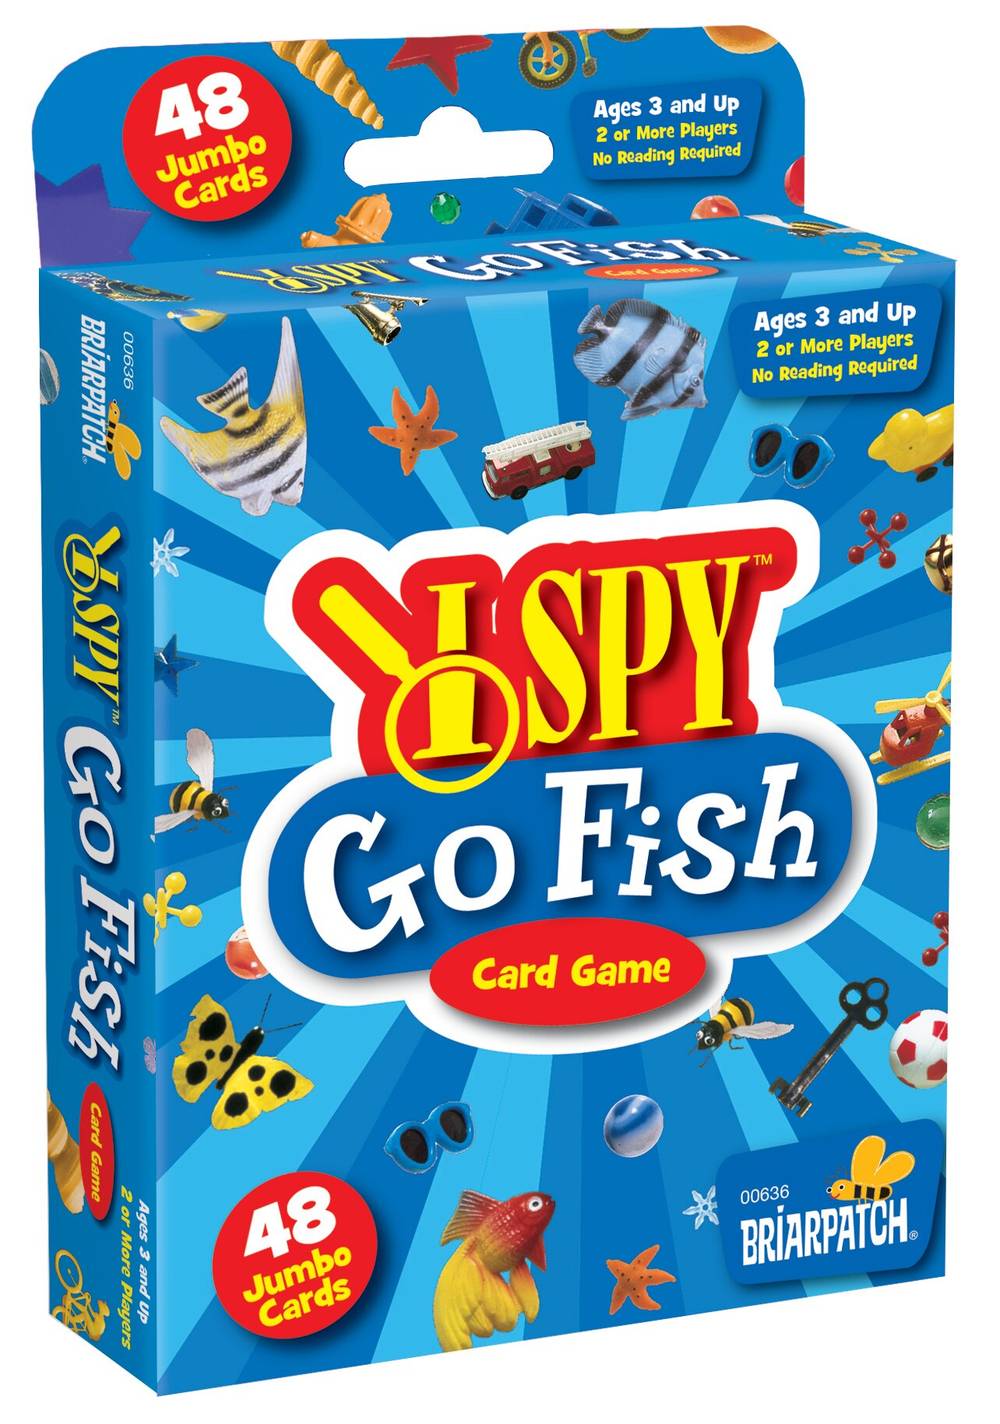 I Spy Card Game Assortment, 3 Games Included